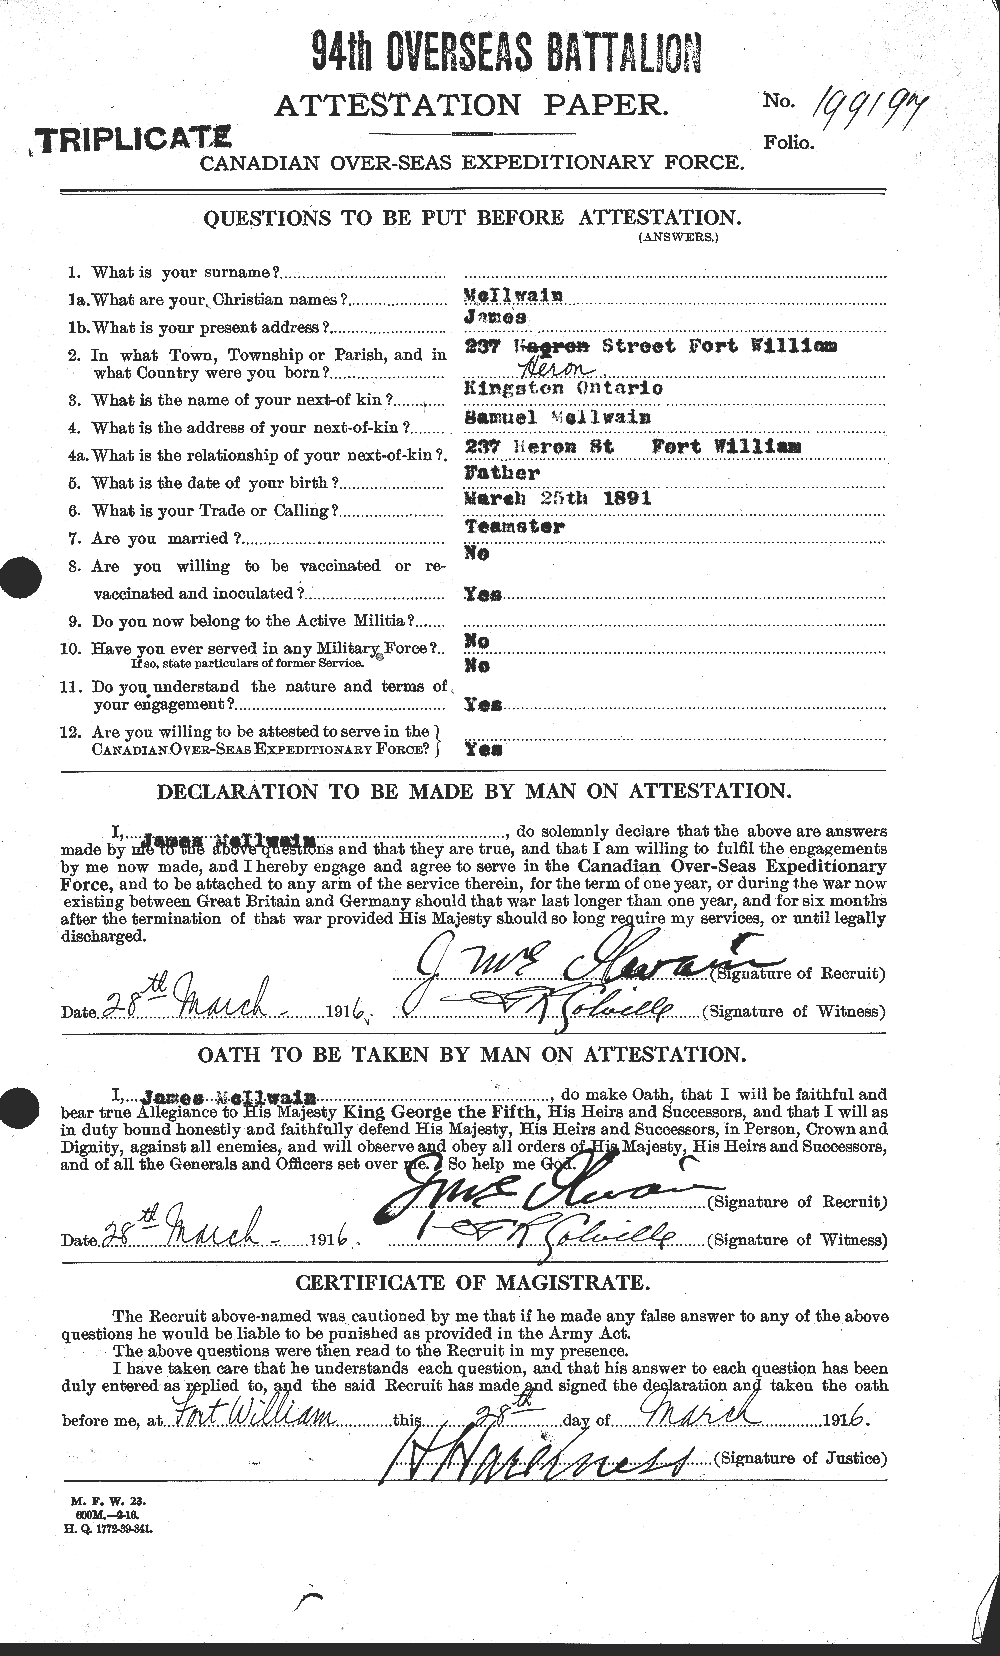 Personnel Records of the First World War - CEF 526499a